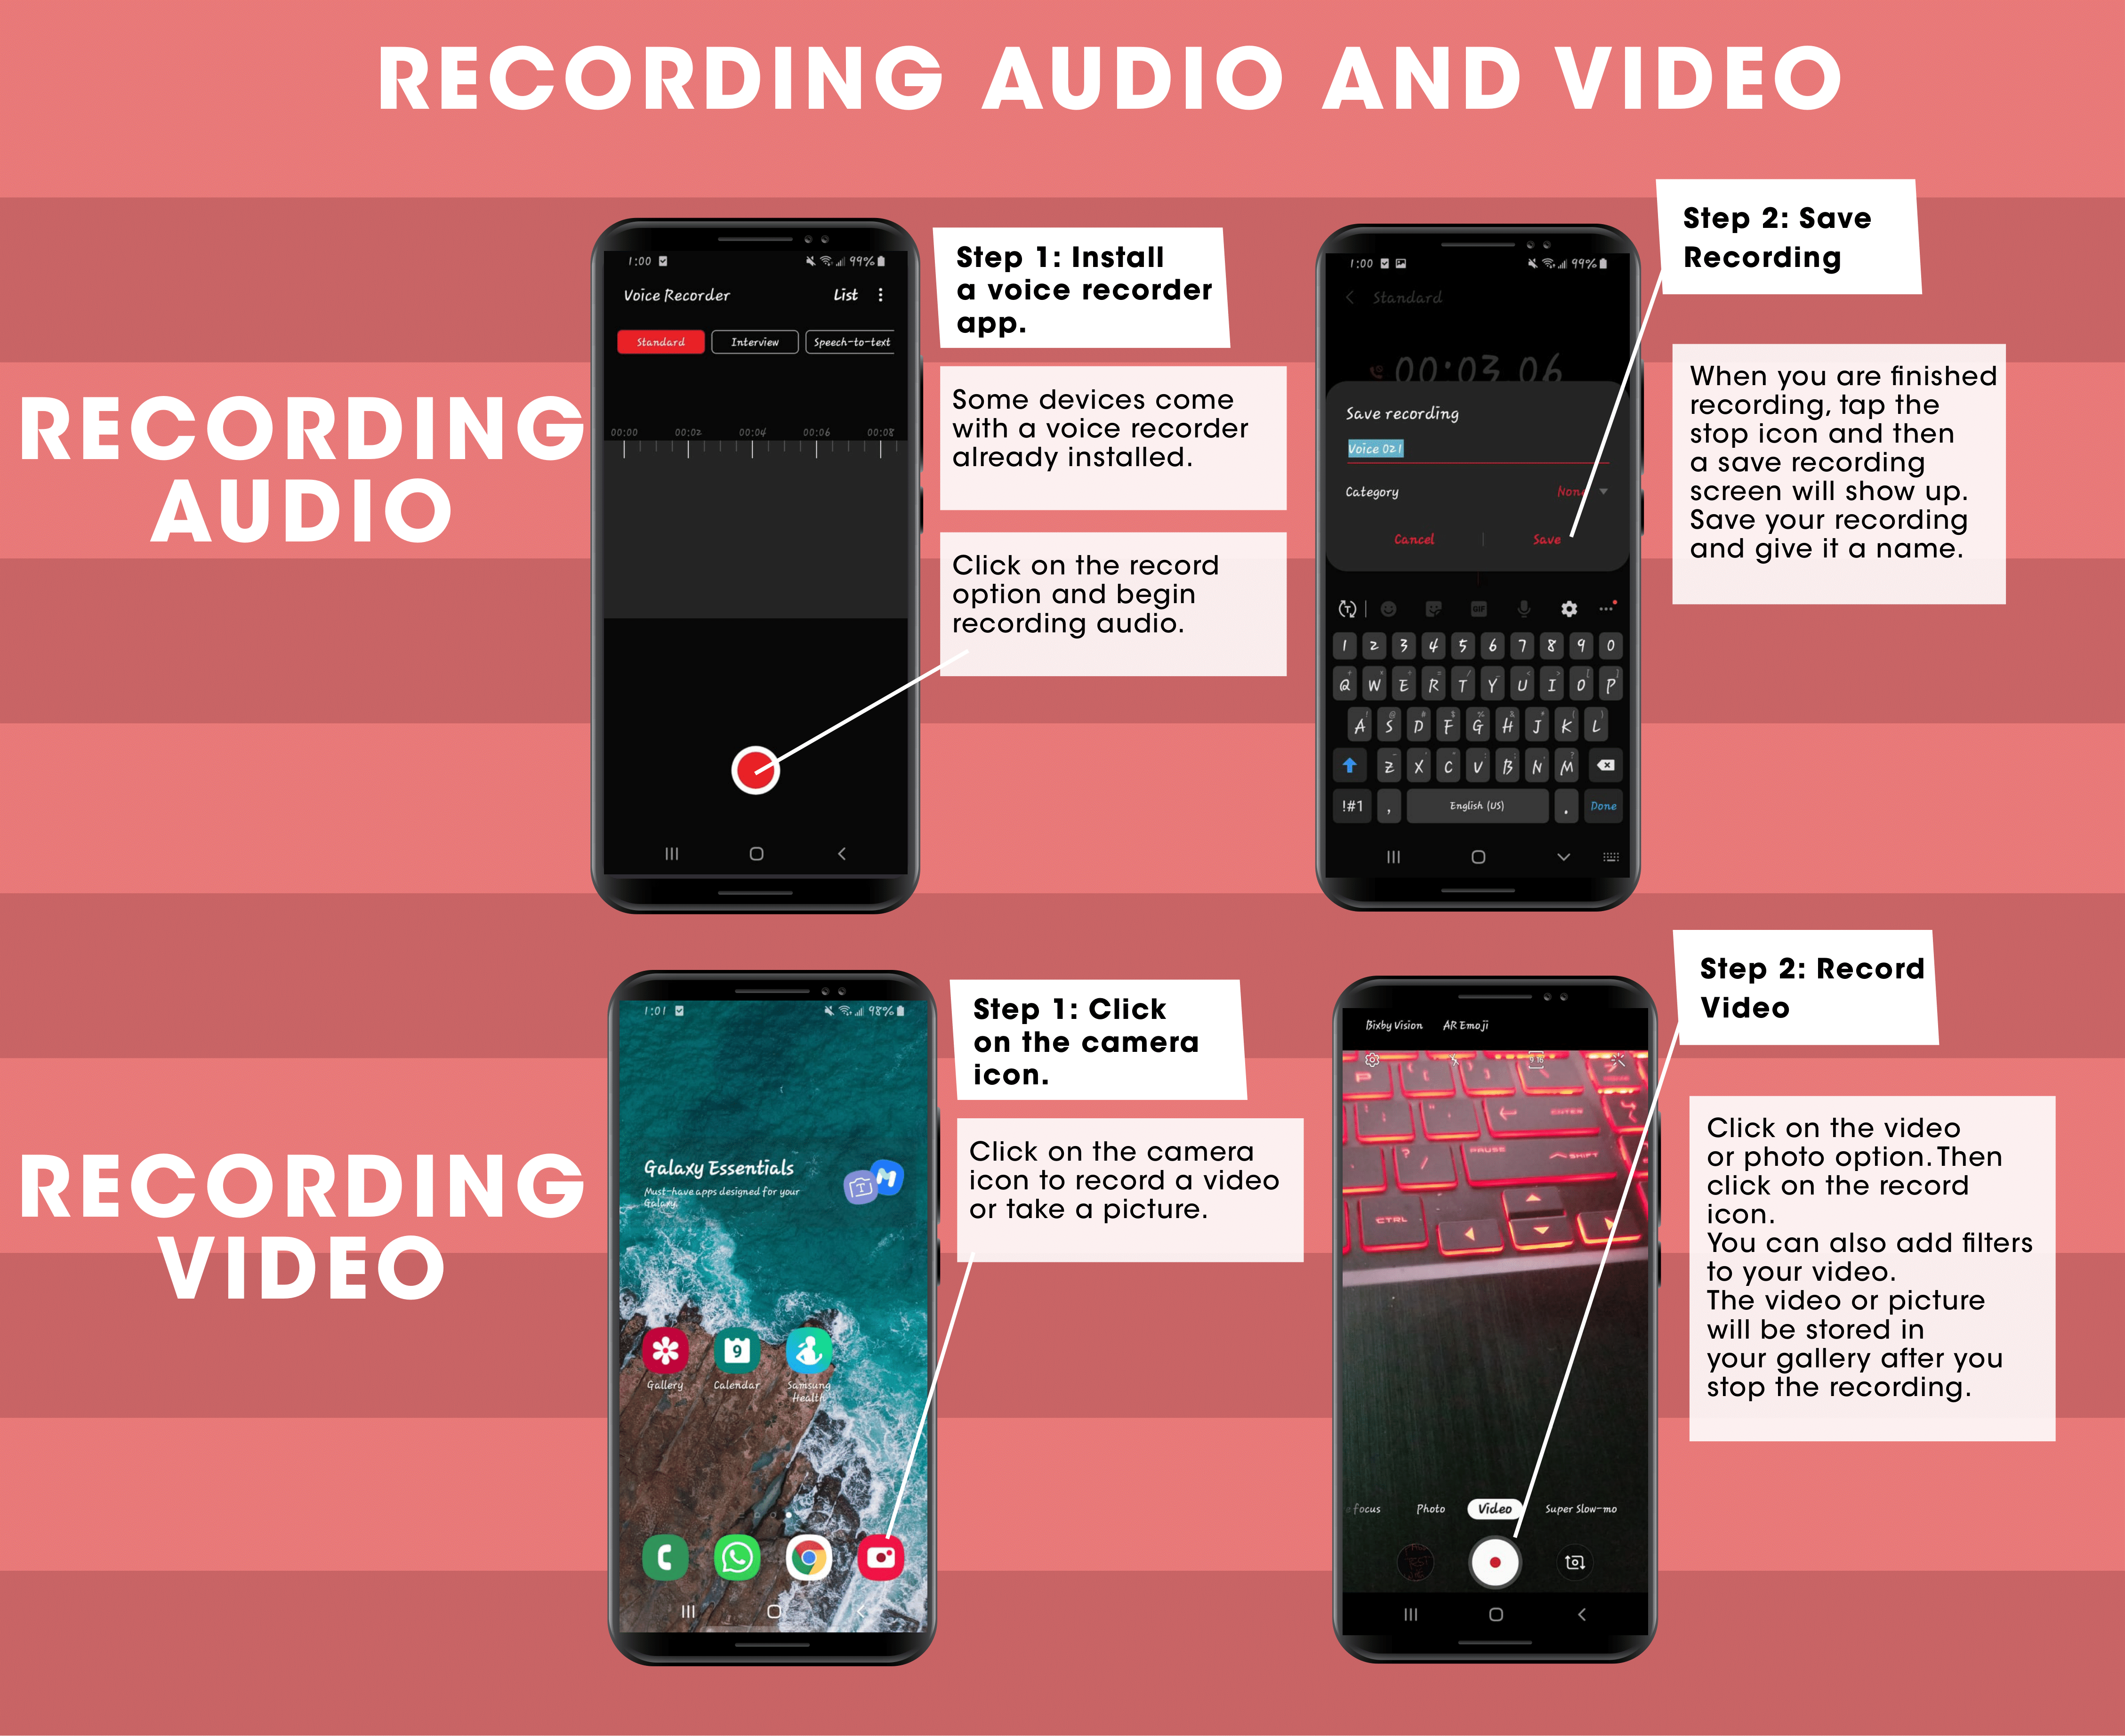 Graphic showing the different steps in recording audio and video